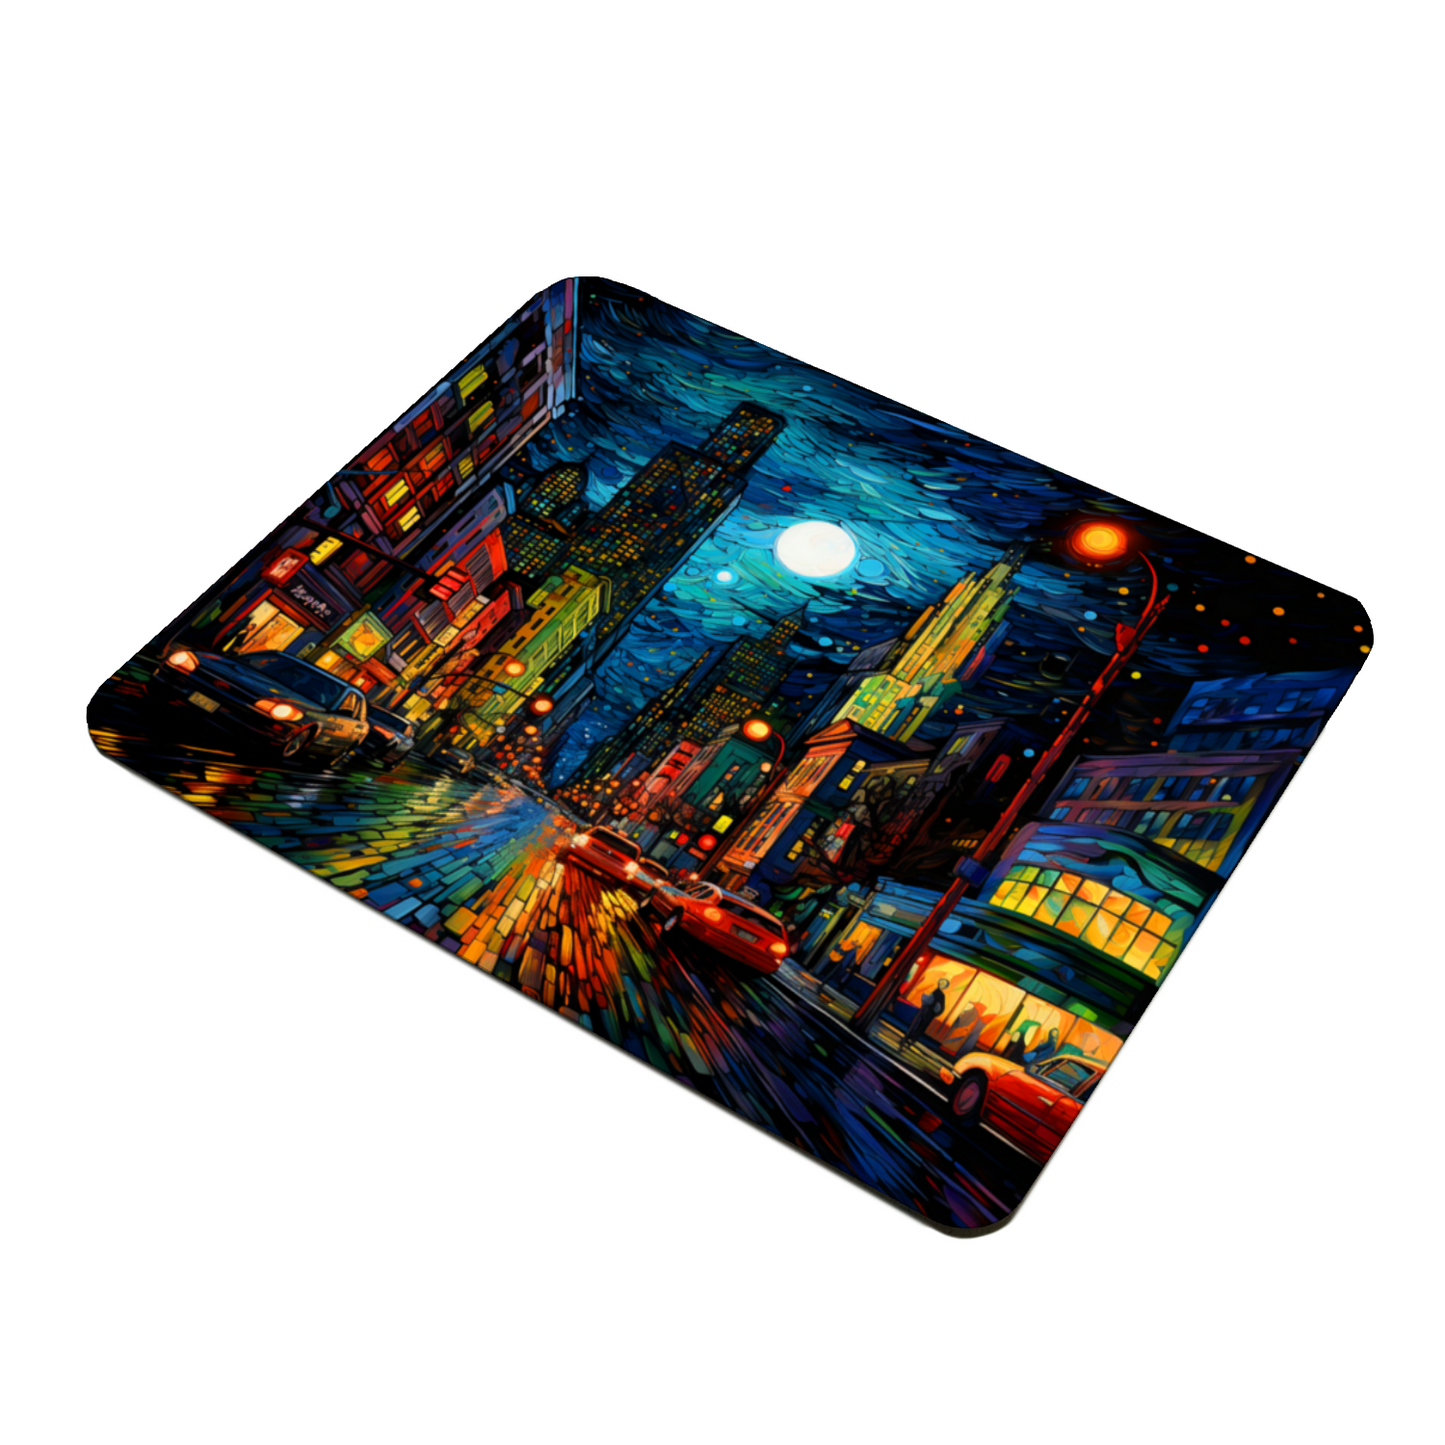 Neon Nightscape Wooden Placemat